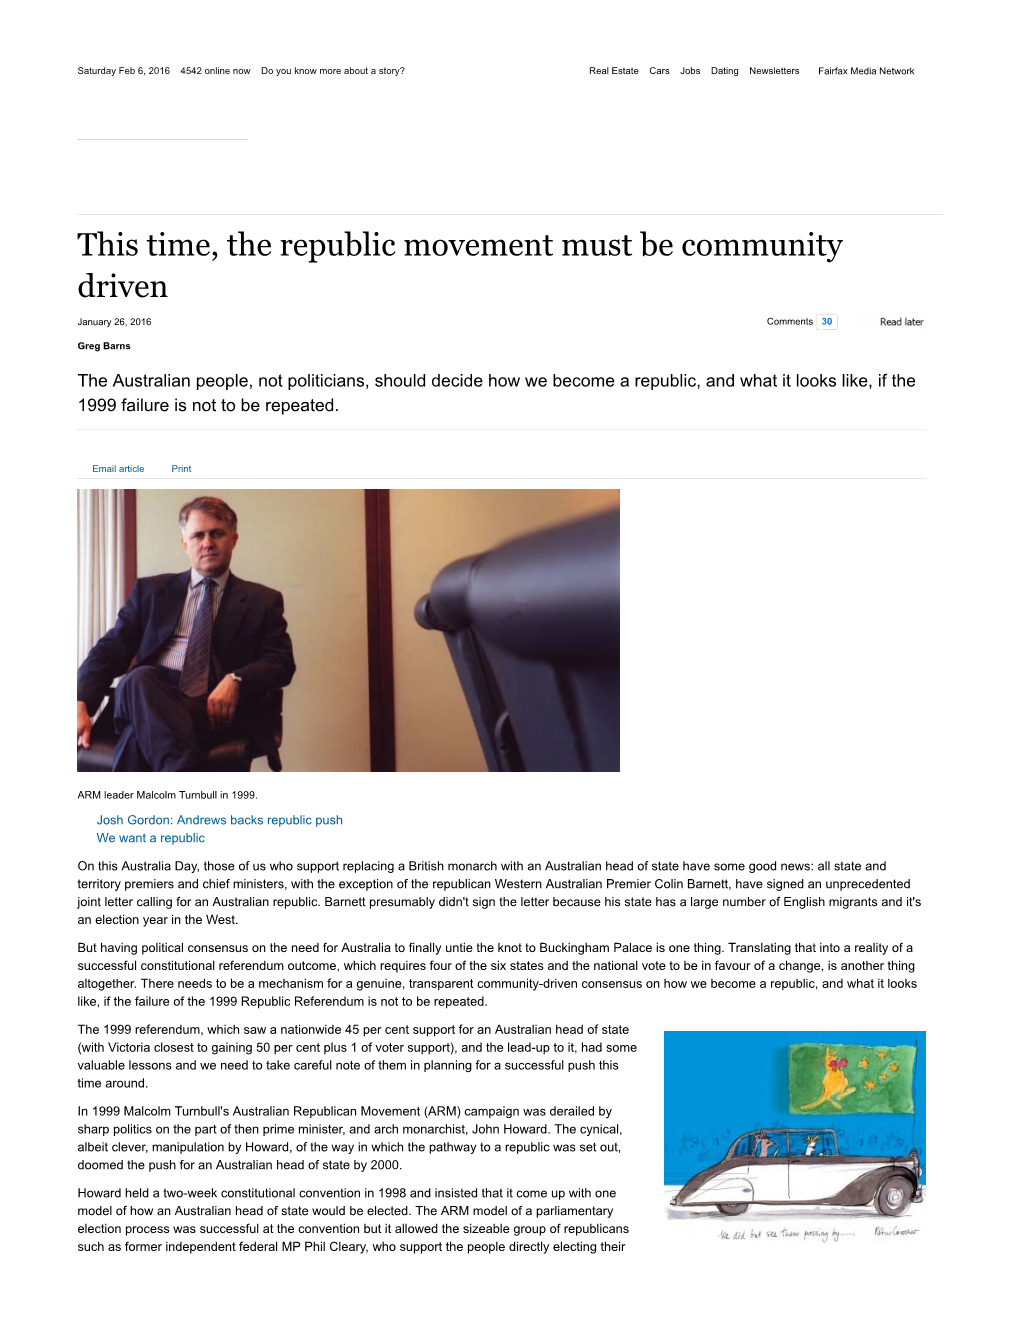 This Time, the Republic Movement Must Be Community Driven